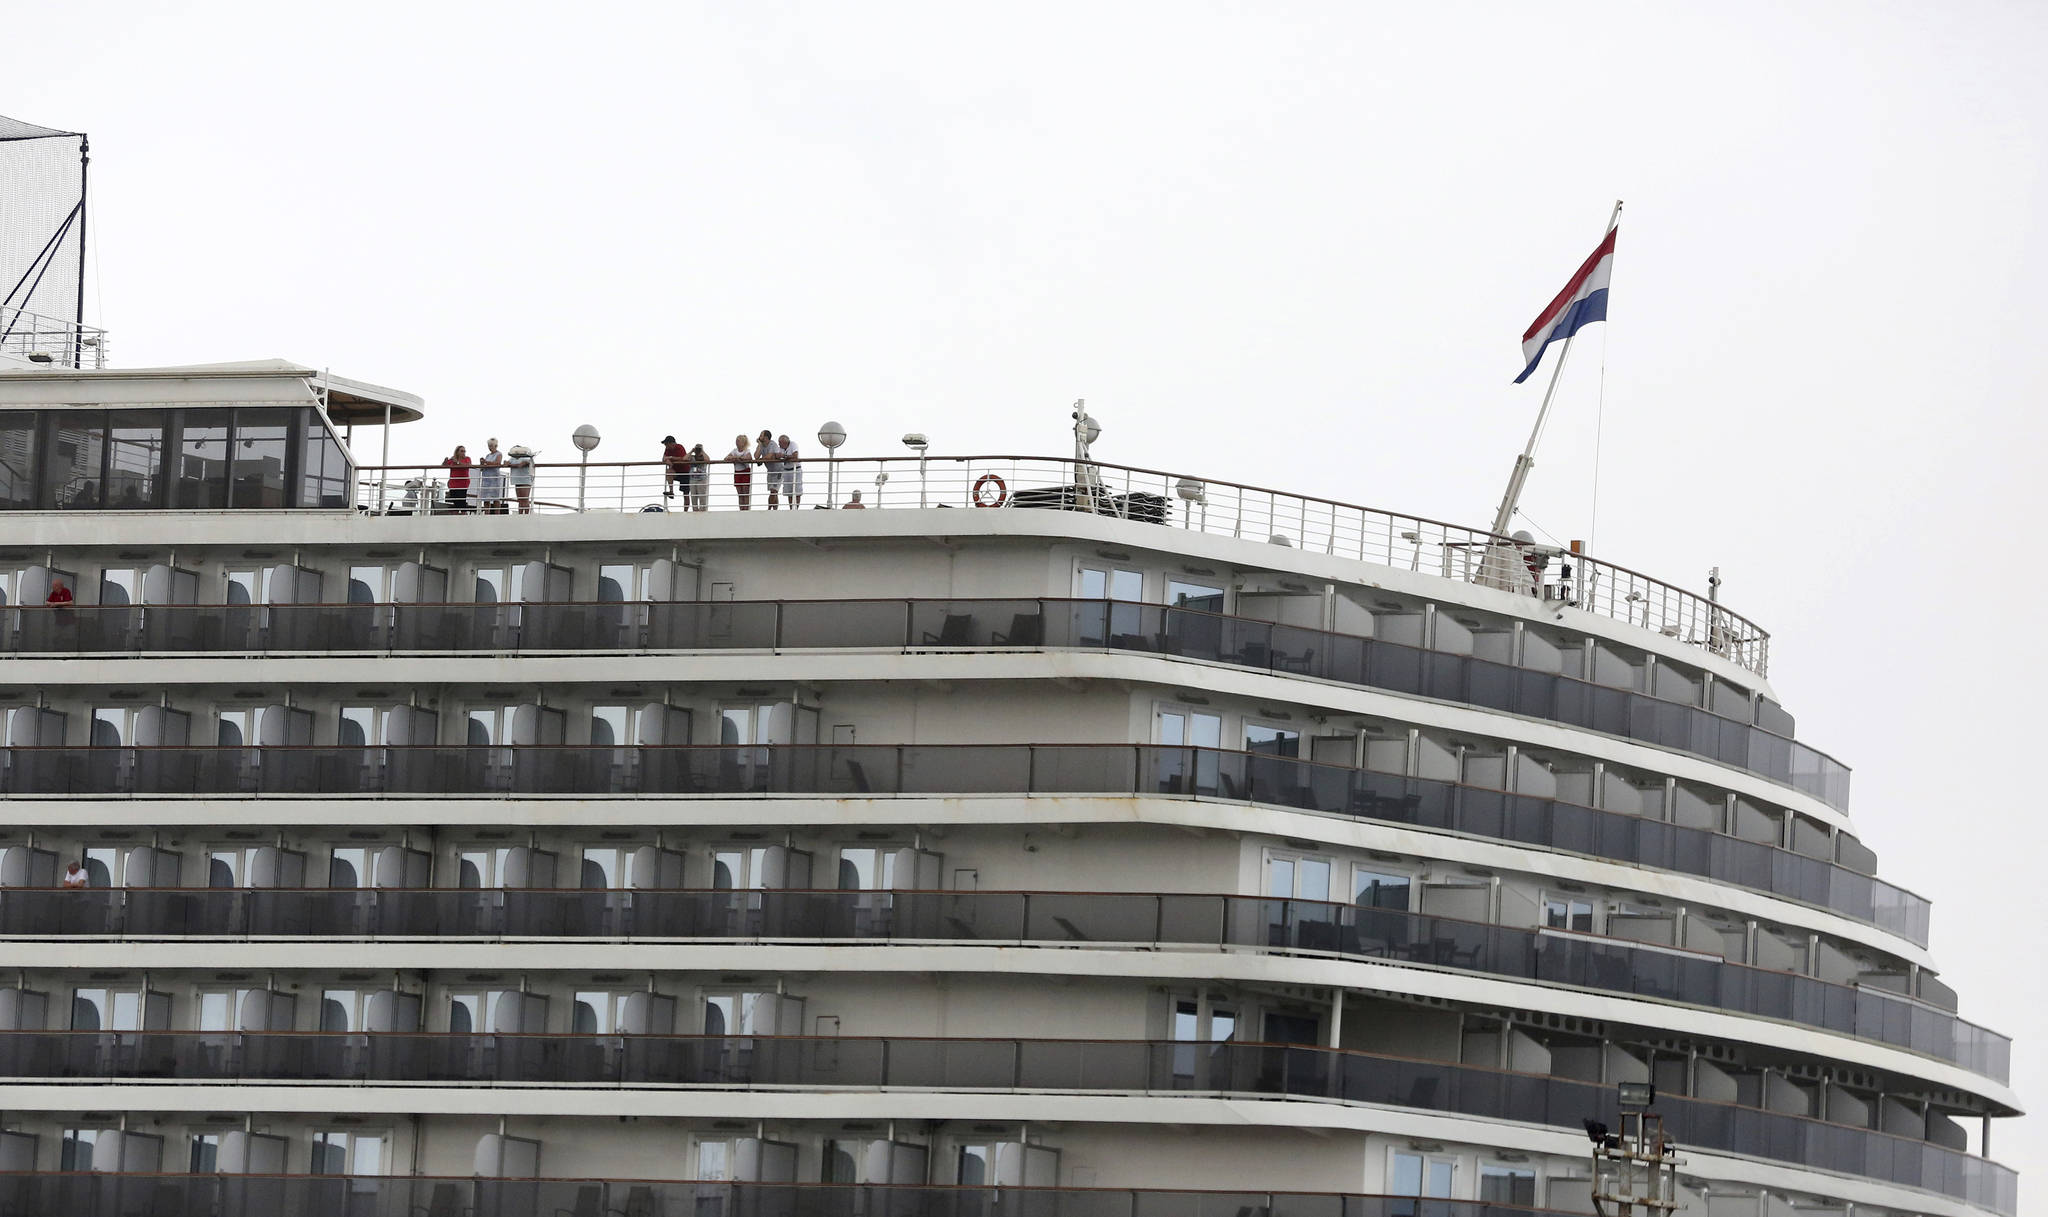 Passengers stand on the top deck of the MS Westerdam while the cruise ship is docked in Sihanoukville, Cambodia Monday, Feb. 17, 2020. (AP Photo)